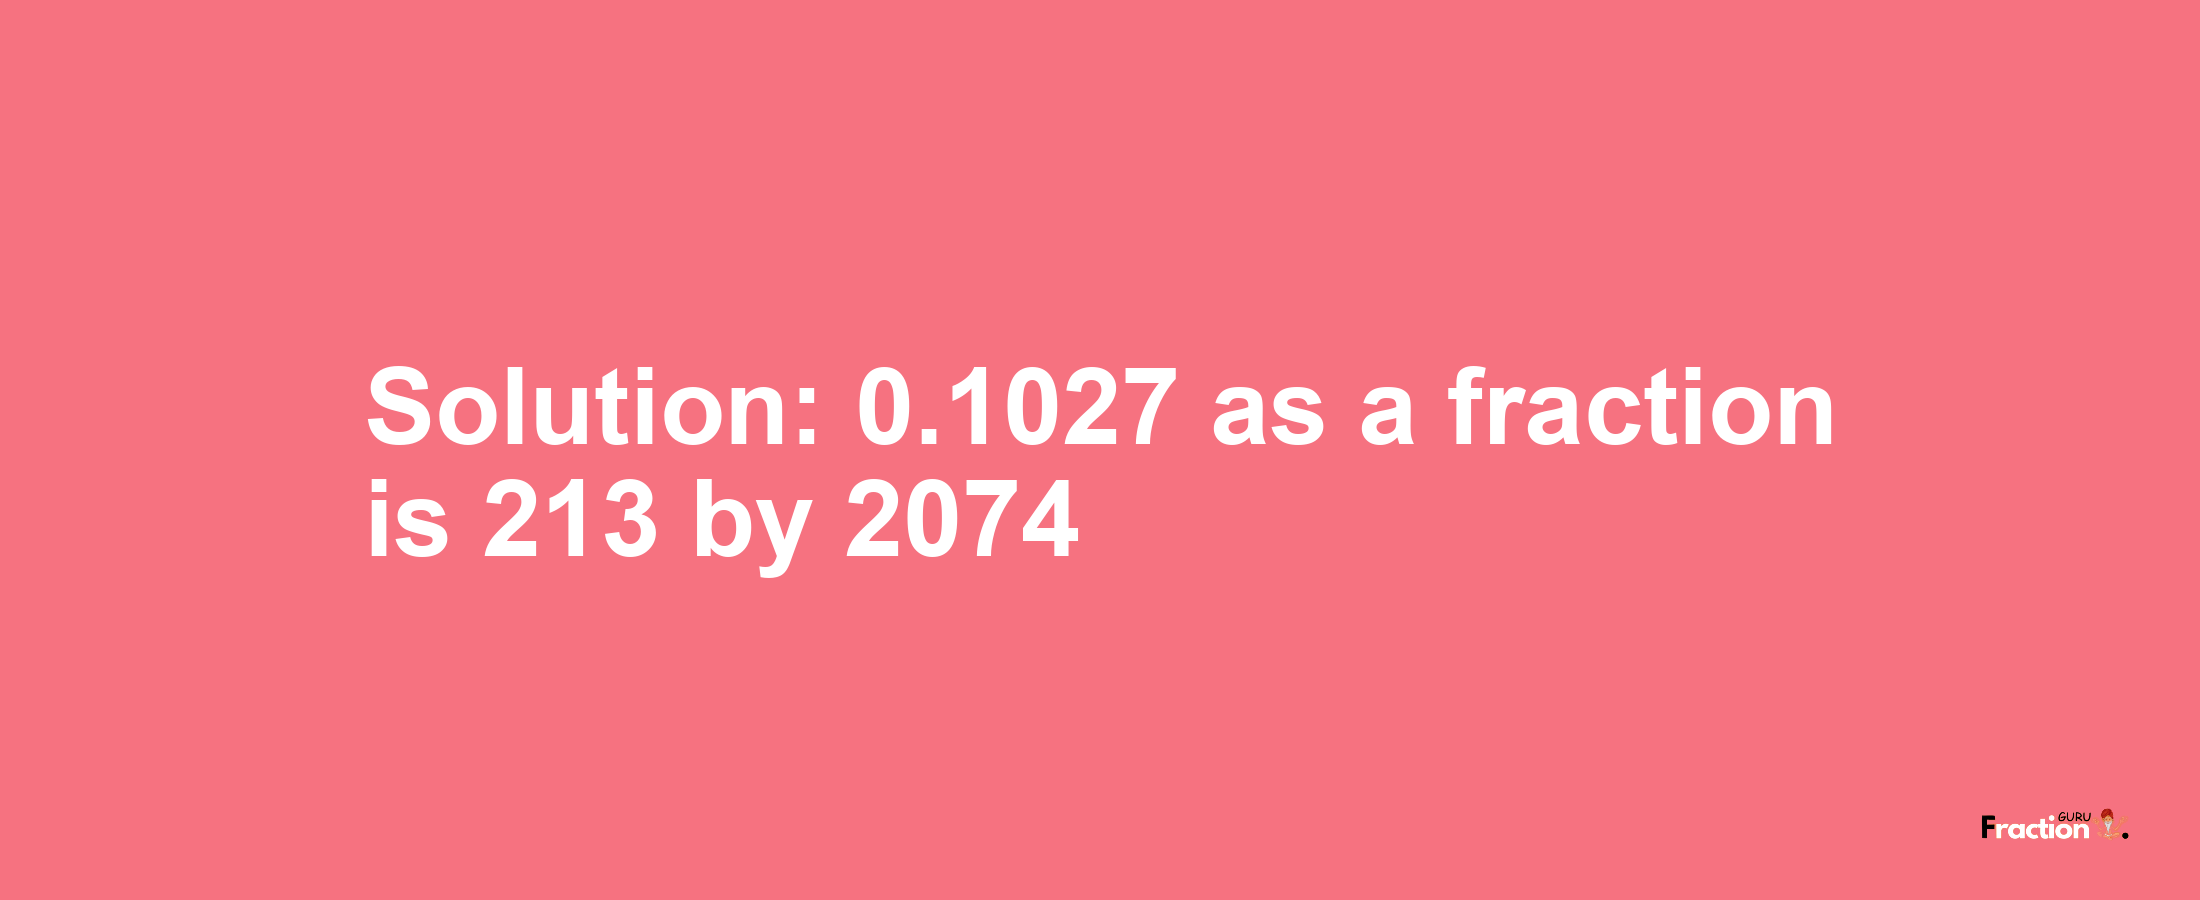 Solution:0.1027 as a fraction is 213/2074